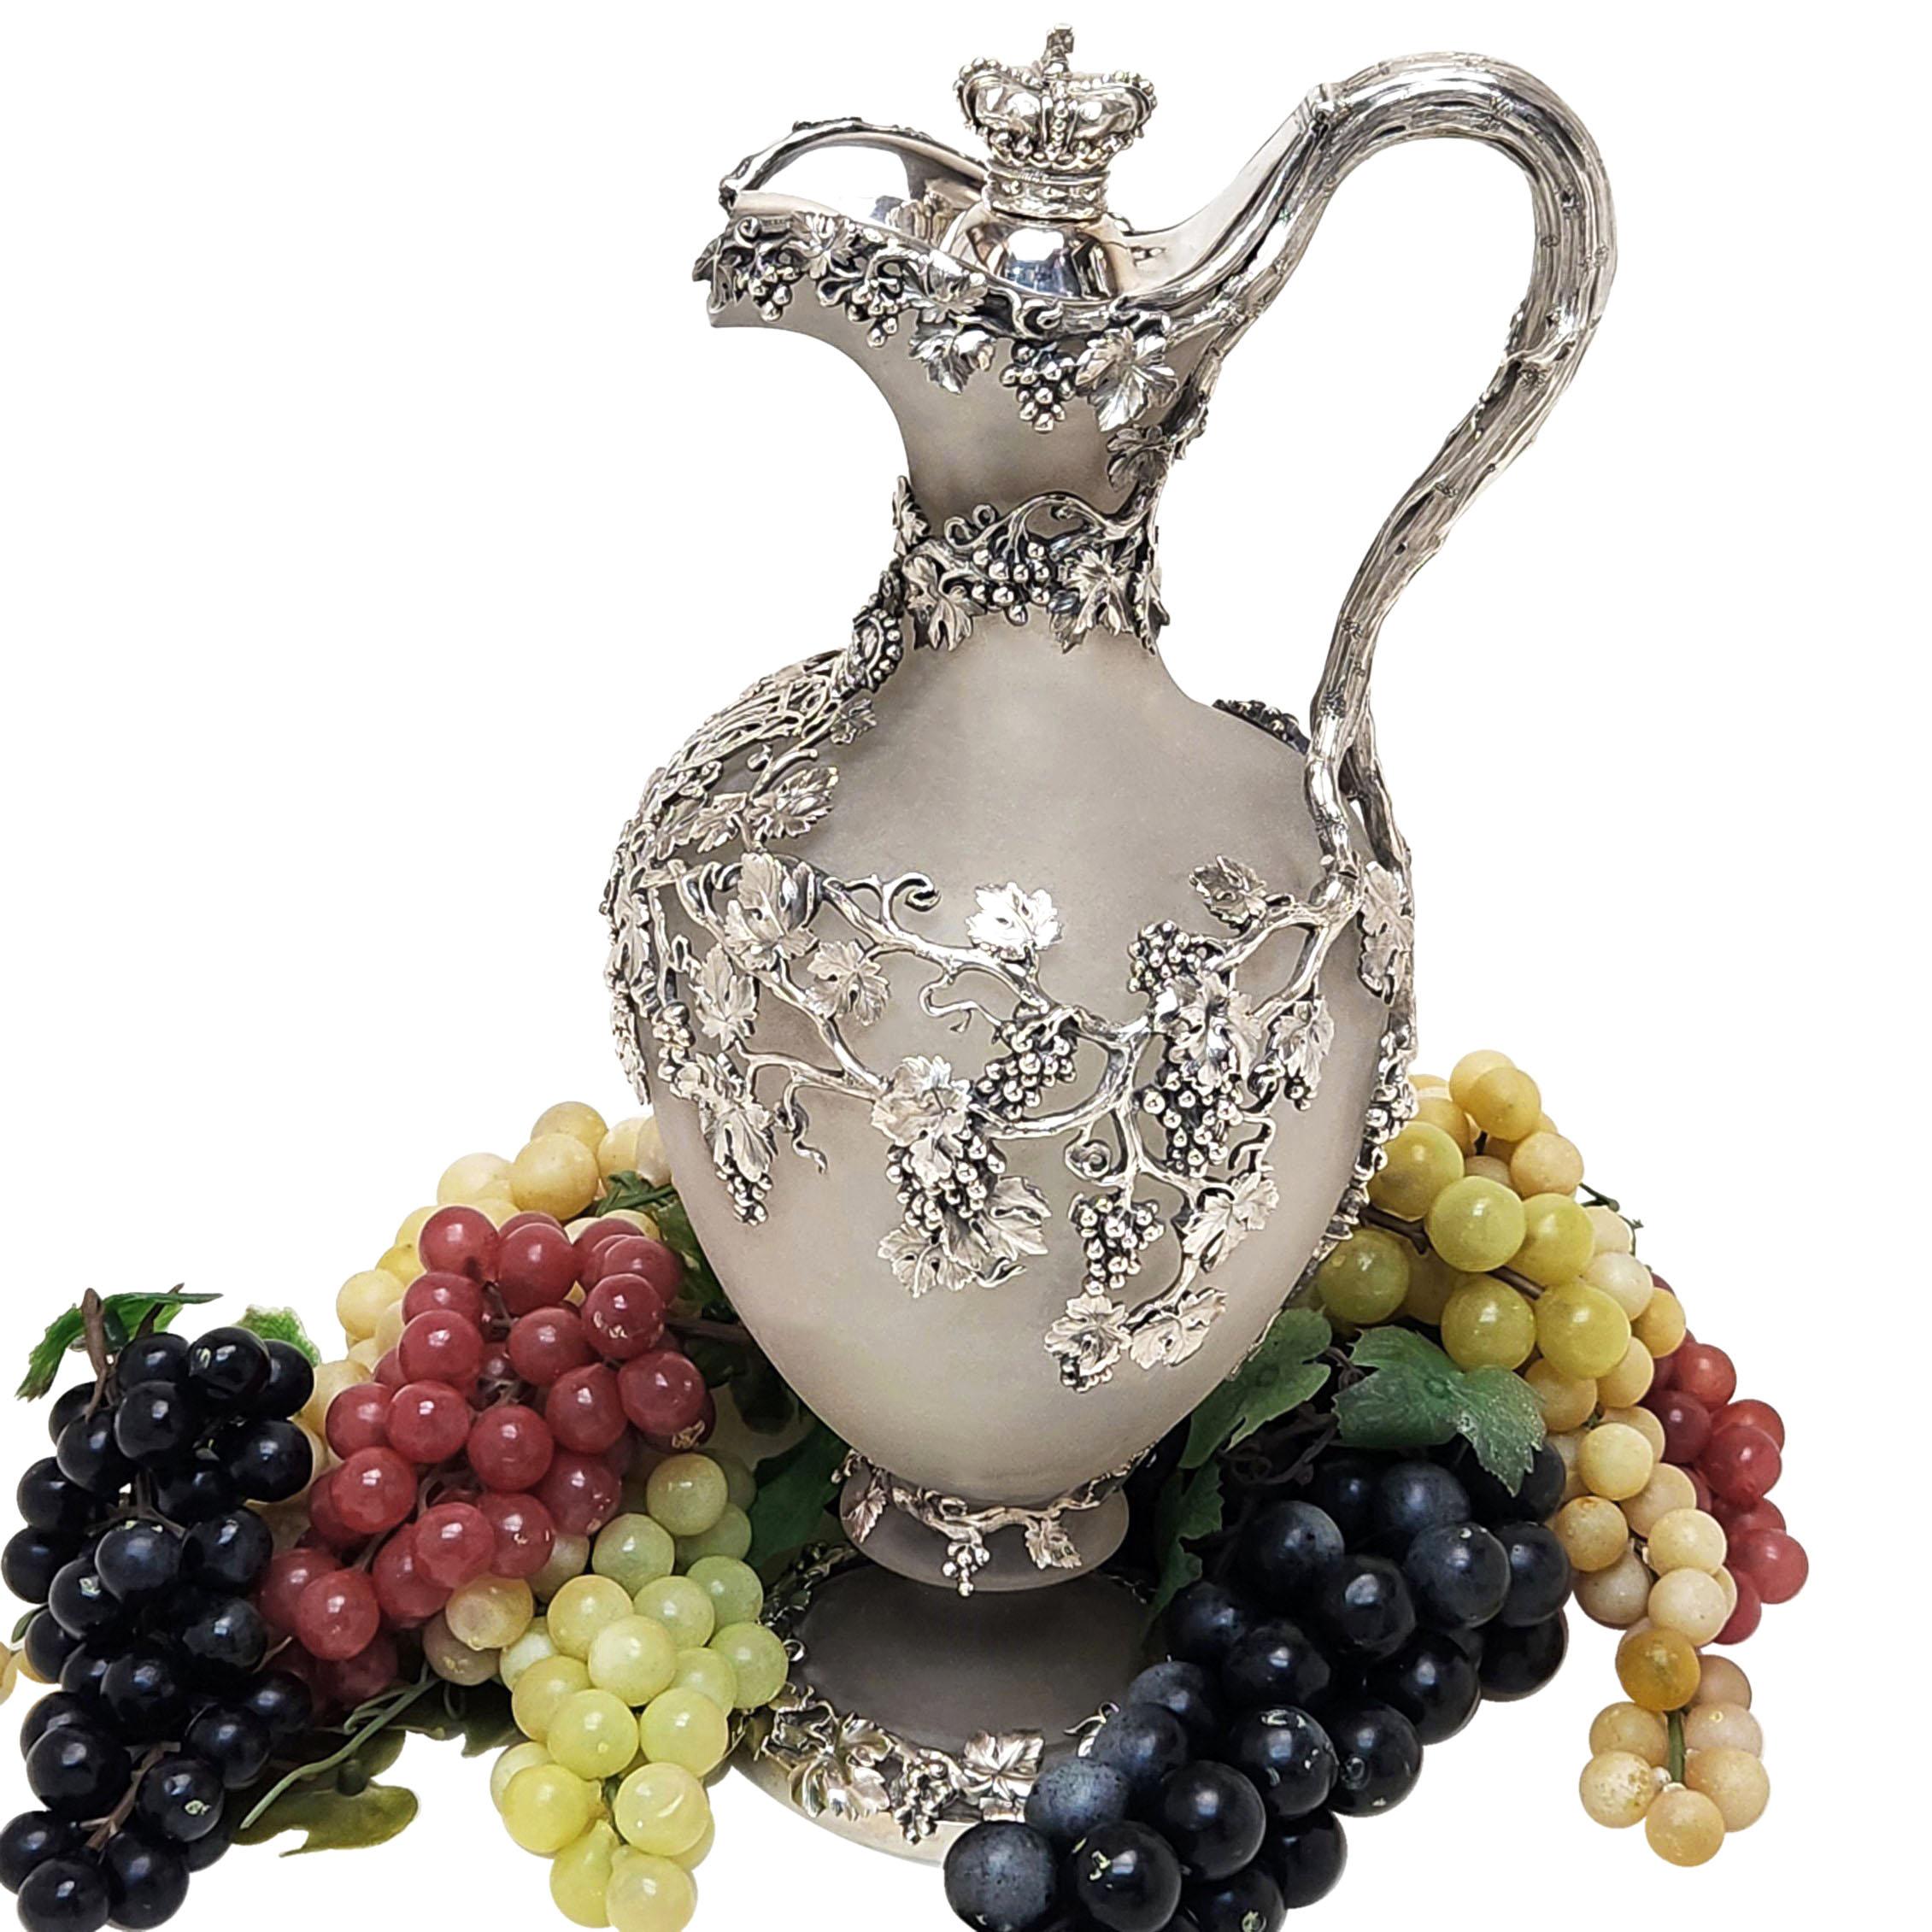 A magnificent Antique Victorian Silver Claret Jug with a frosted glass body and mounted with an ornate Sterling Silver grape vine design. The Silver grape vine pattern wraps wound the body of the Wine Jug and extends to the foot and hinged lid. The